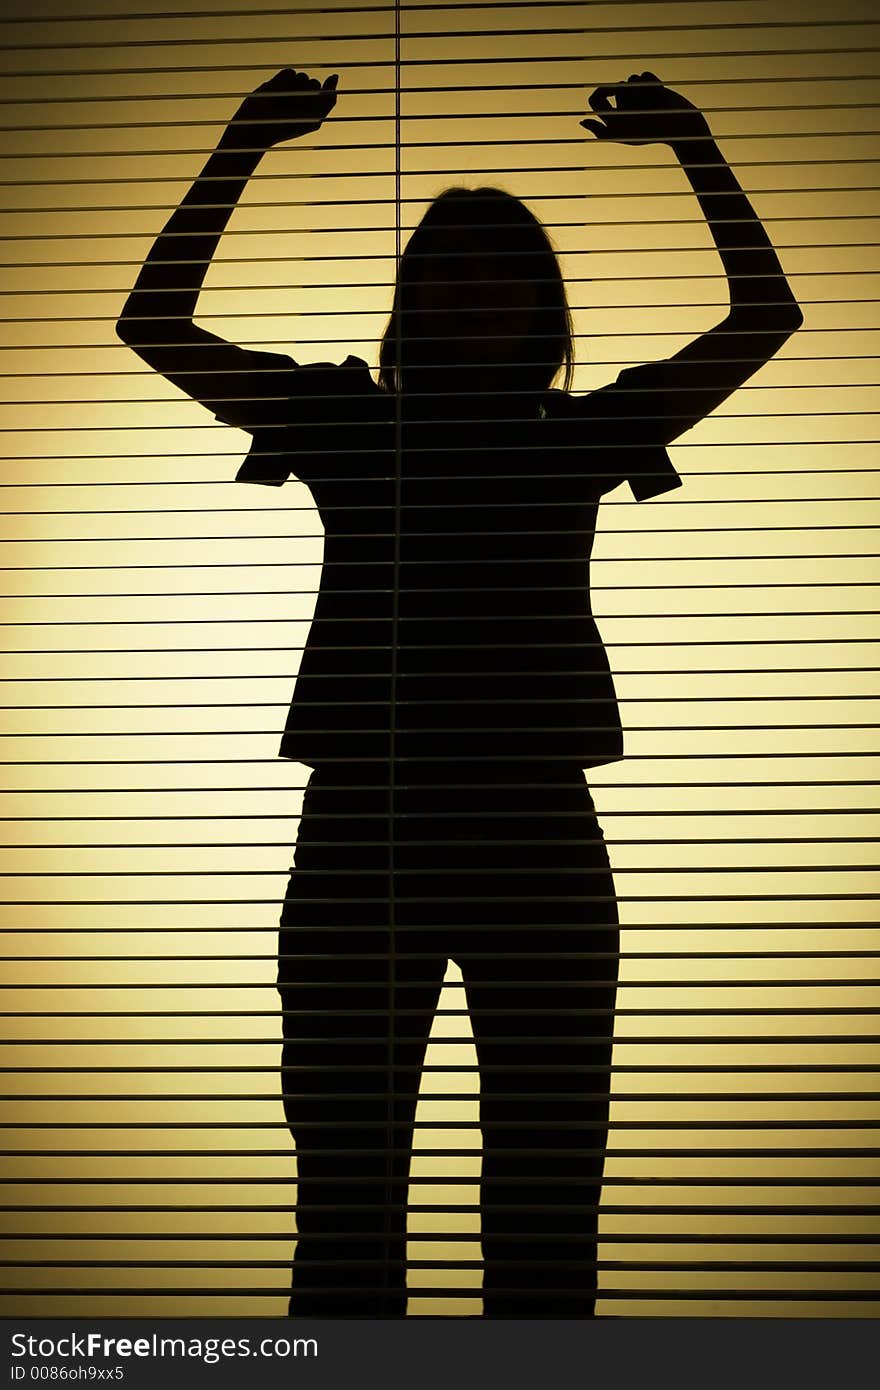 Isolated on gold silhouette of woman with hands up (focus on the blind). Isolated on gold silhouette of woman with hands up (focus on the blind)